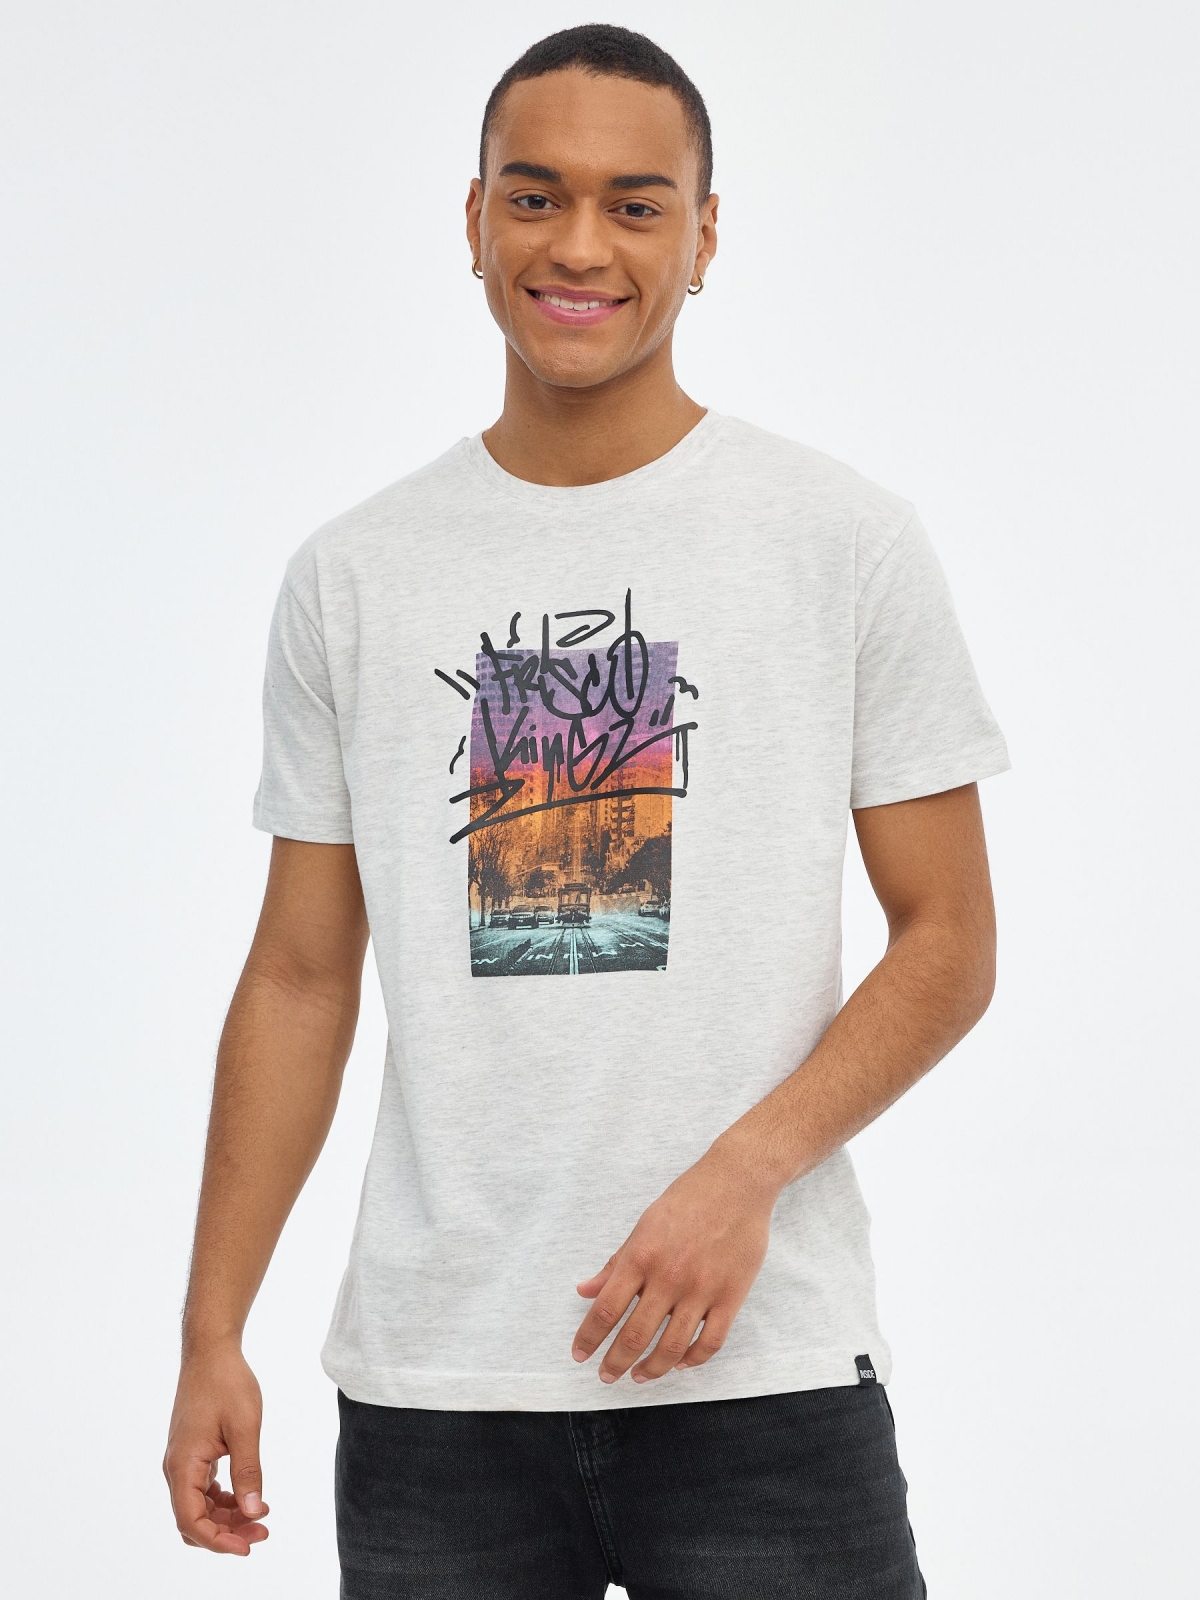 T-shirt with photo and graffiti grey middle front view